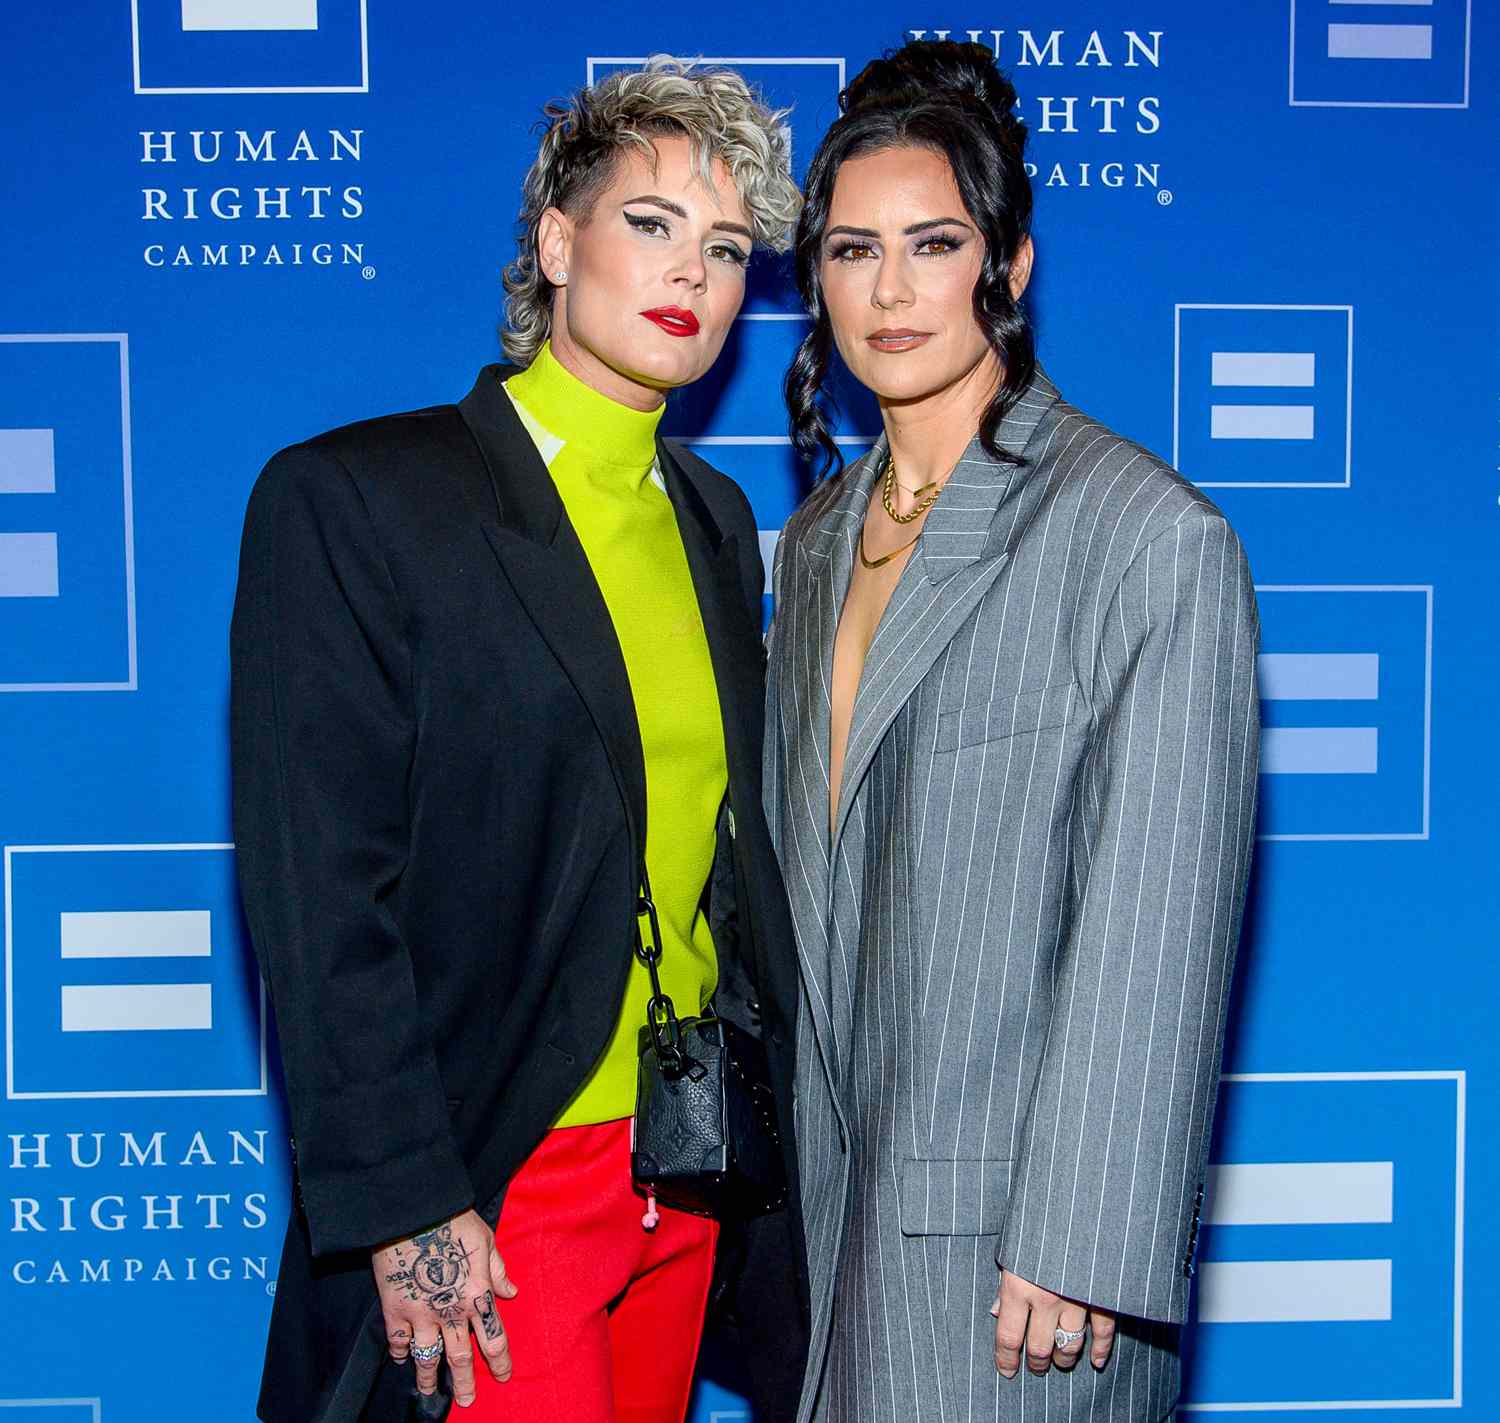 Ali Krieger and Ashlyn Harris attend the Human Rights Campaign's 2023 Greater New York Dinner at The New York Marriott Marquis on February 04, 2023 in New York City.